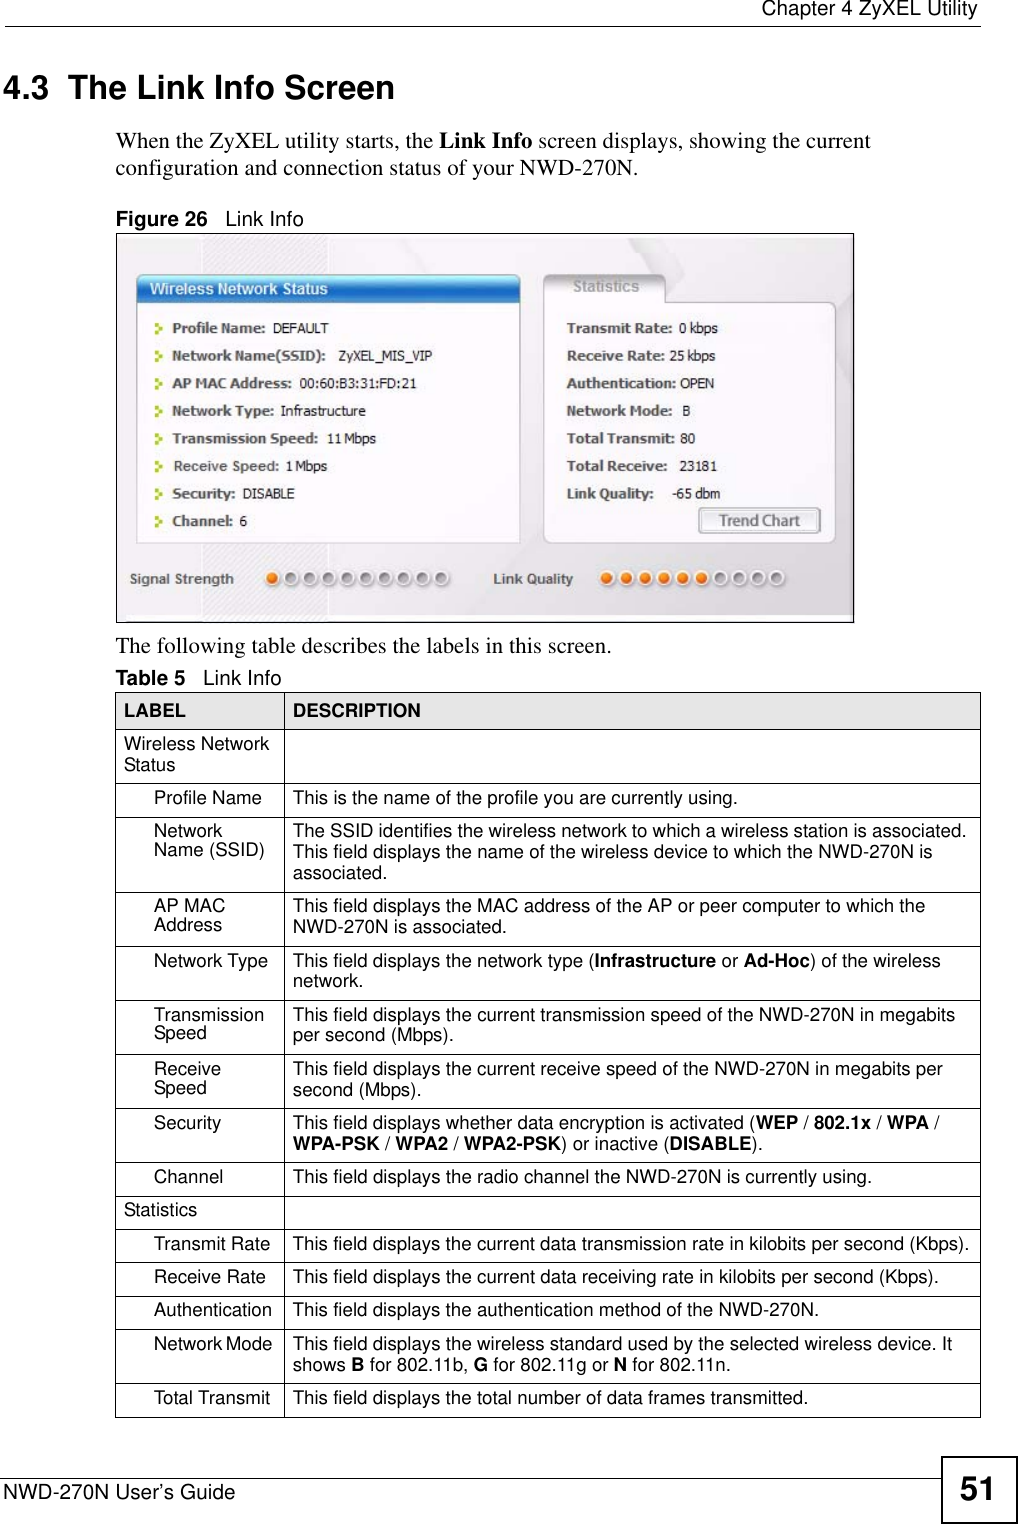  Chapter 4 ZyXEL UtilityNWD-270N User’s Guide 514.3  The Link Info Screen When the ZyXEL utility starts, the Link Info screen displays, showing the current configuration and connection status of your NWD-270N.Figure 26   Link Info The following table describes the labels in this screen. Table 5   Link Info LABEL DESCRIPTIONWireless Network StatusProfile Name This is the name of the profile you are currently using.Network Name (SSID) The SSID identifies the wireless network to which a wireless station is associated. This field displays the name of the wireless device to which the NWD-270N is associated.AP MAC Address This field displays the MAC address of the AP or peer computer to which the NWD-270N is associated.Network Type This field displays the network type (Infrastructure or Ad-Hoc) of the wireless network.Transmission Speed  This field displays the current transmission speed of the NWD-270N in megabits per second (Mbps).Receive Speed This field displays the current receive speed of the NWD-270N in megabits per second (Mbps).Security  This field displays whether data encryption is activated (WEP / 802.1x / WPA /WPA-PSK / WPA2 / WPA2-PSK) or inactive (DISABLE).Channel This field displays the radio channel the NWD-270N is currently using.StatisticsTransmit Rate This field displays the current data transmission rate in kilobits per second (Kbps).Receive Rate  This field displays the current data receiving rate in kilobits per second (Kbps).Authentication  This field displays the authentication method of the NWD-270N.Network Mode  This field displays the wireless standard used by the selected wireless device. It shows B for 802.11b, G for 802.11g or N for 802.11n. Total Transmit  This field displays the total number of data frames transmitted.